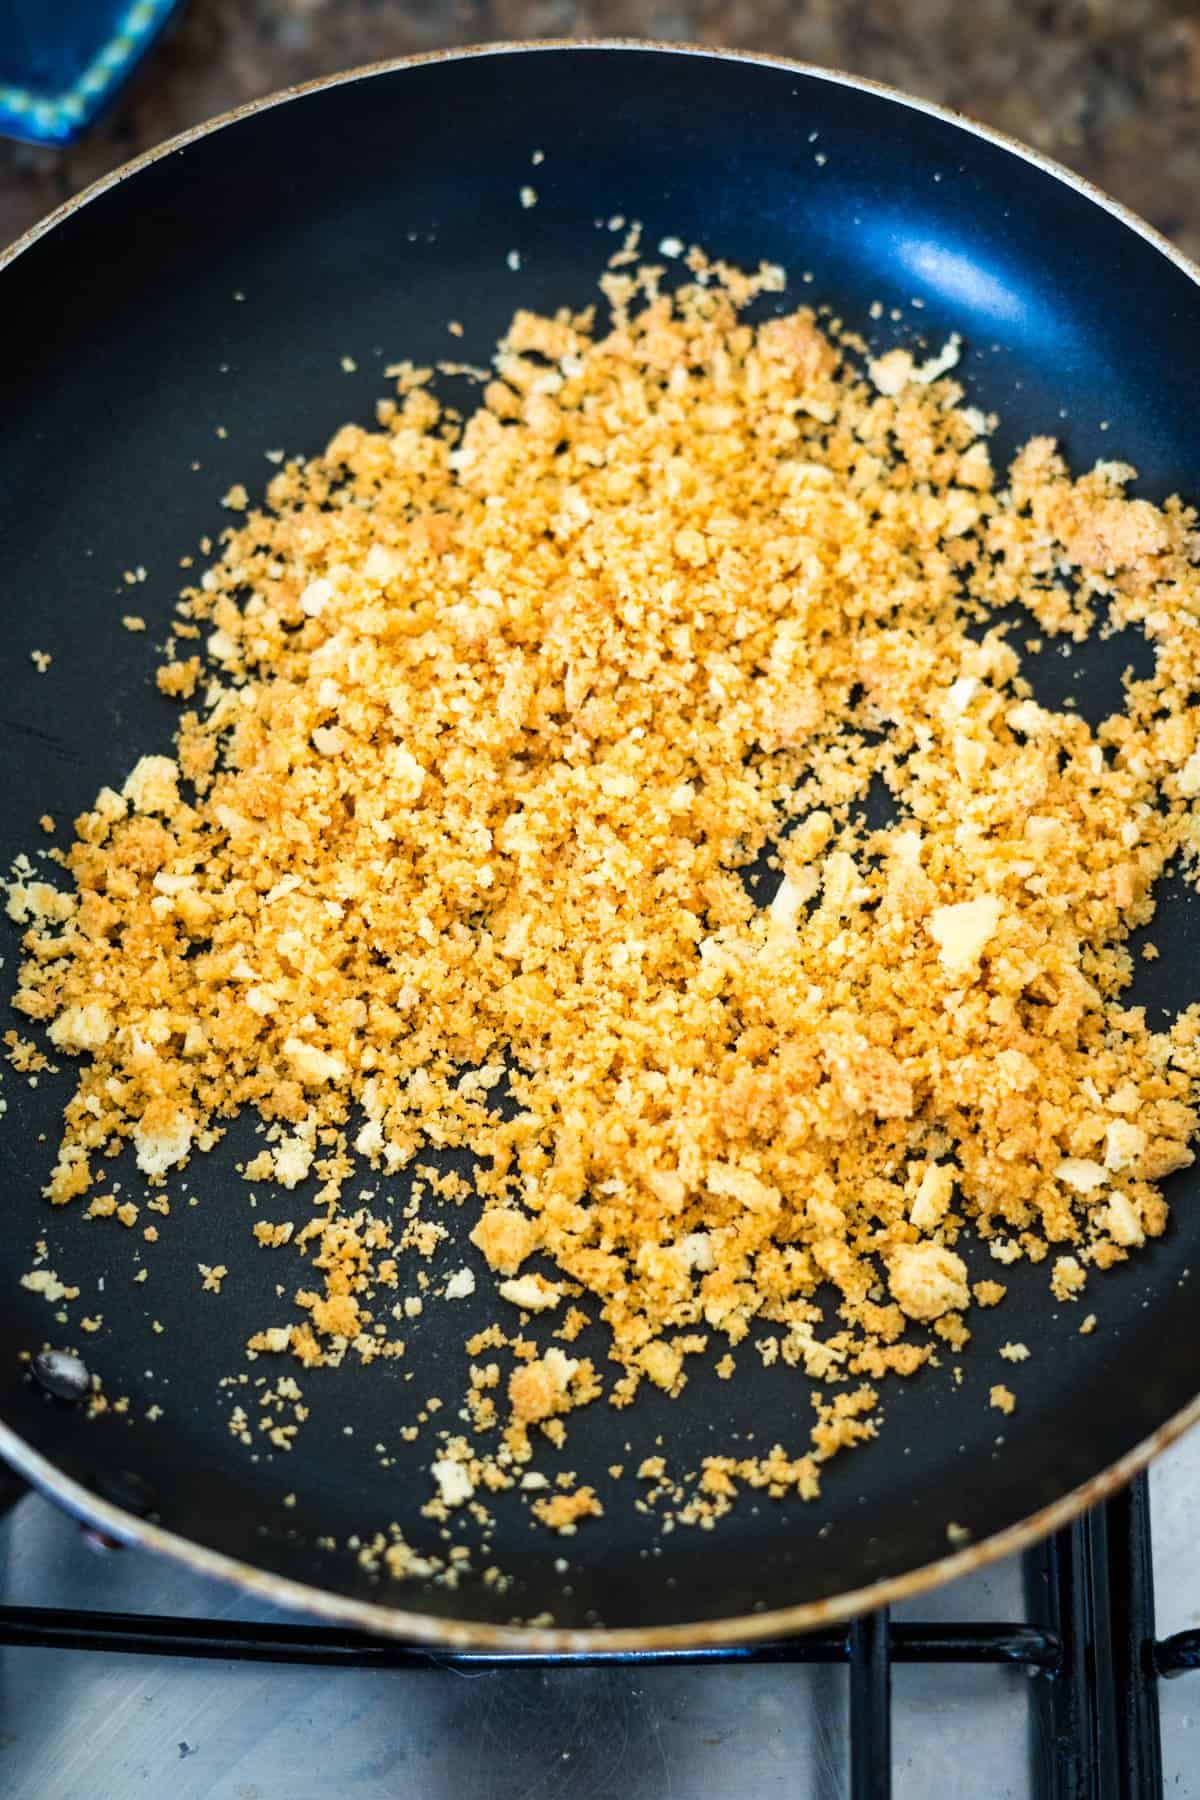 keto bread crumbs and spices in a black frying pan.